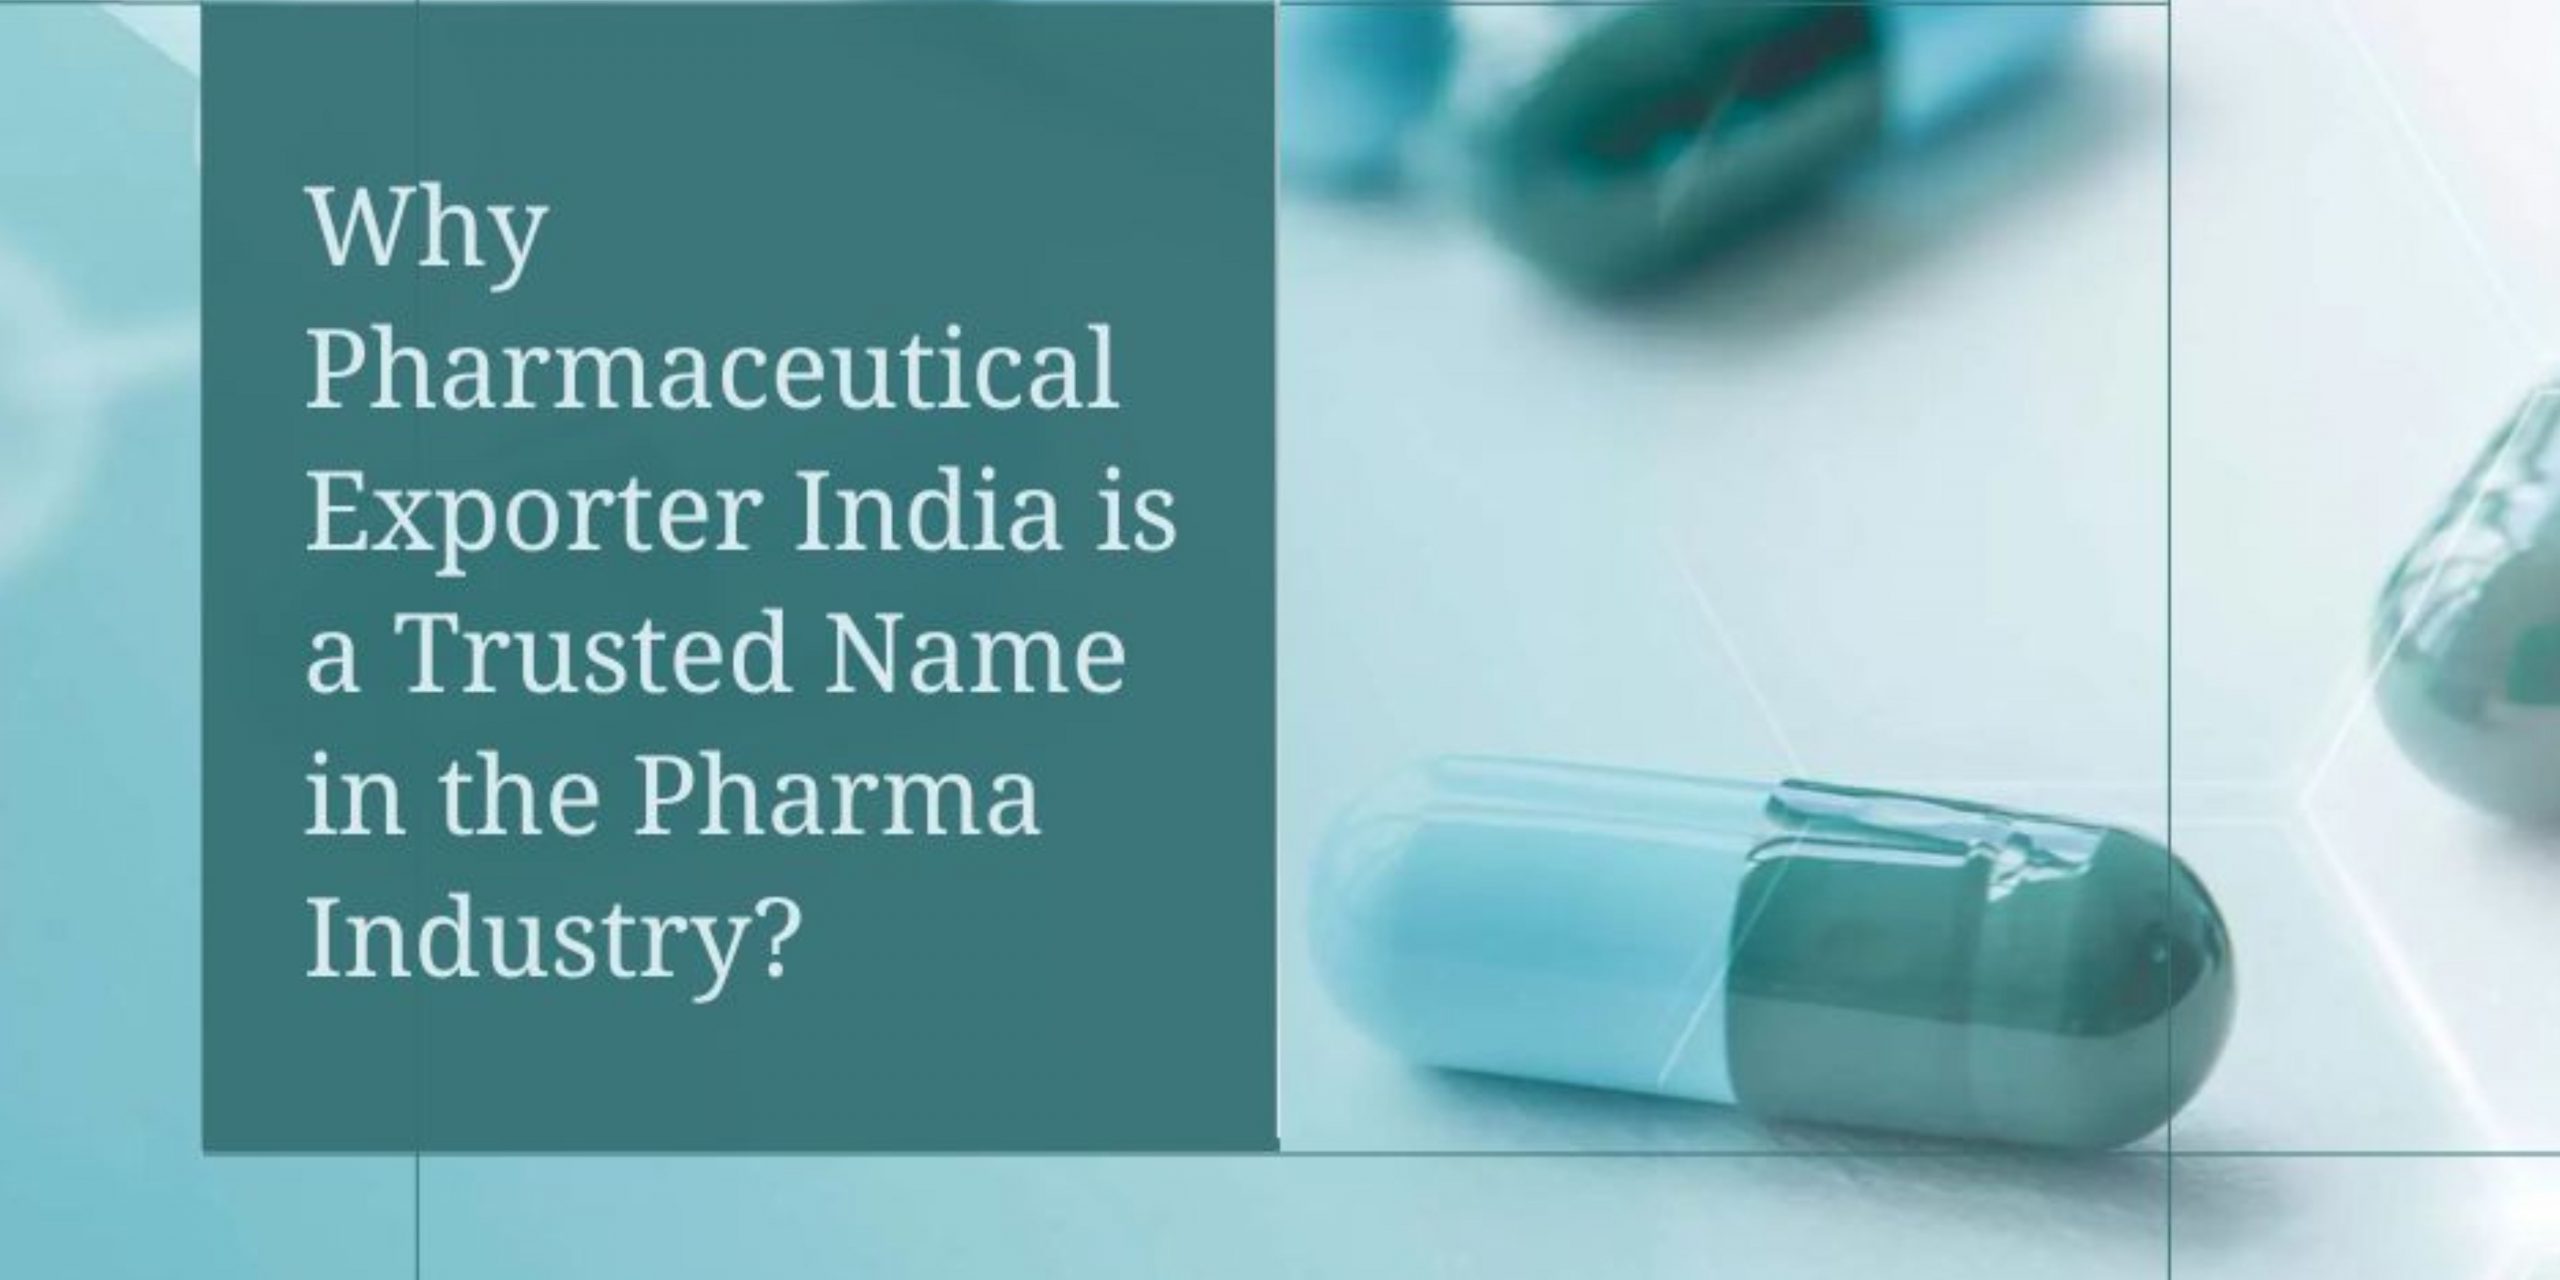 Why Pharmaceutical Exporter India is a Trusted Name in the Pharma Industry